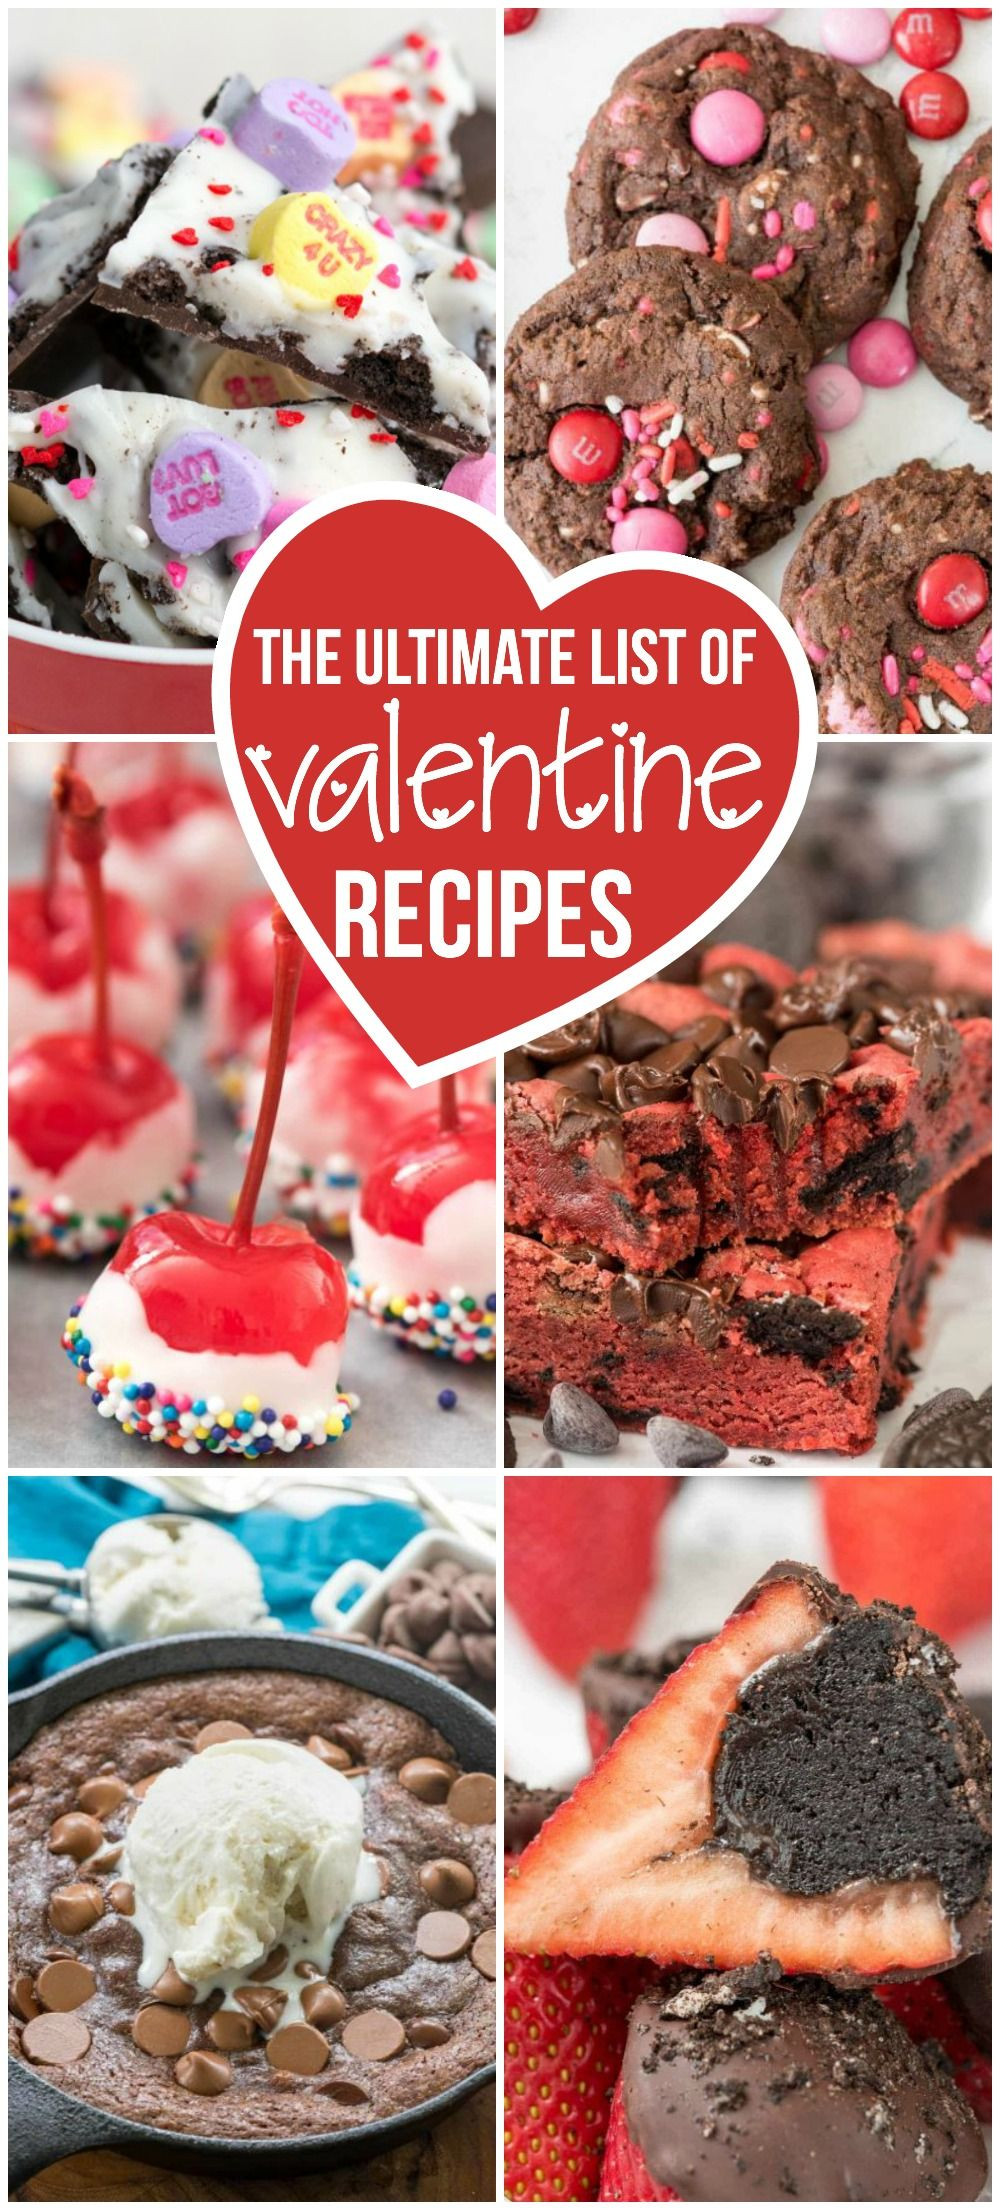 Valentine'S Day Desserts For Two
 The plete List of Valentine s Day Recipes